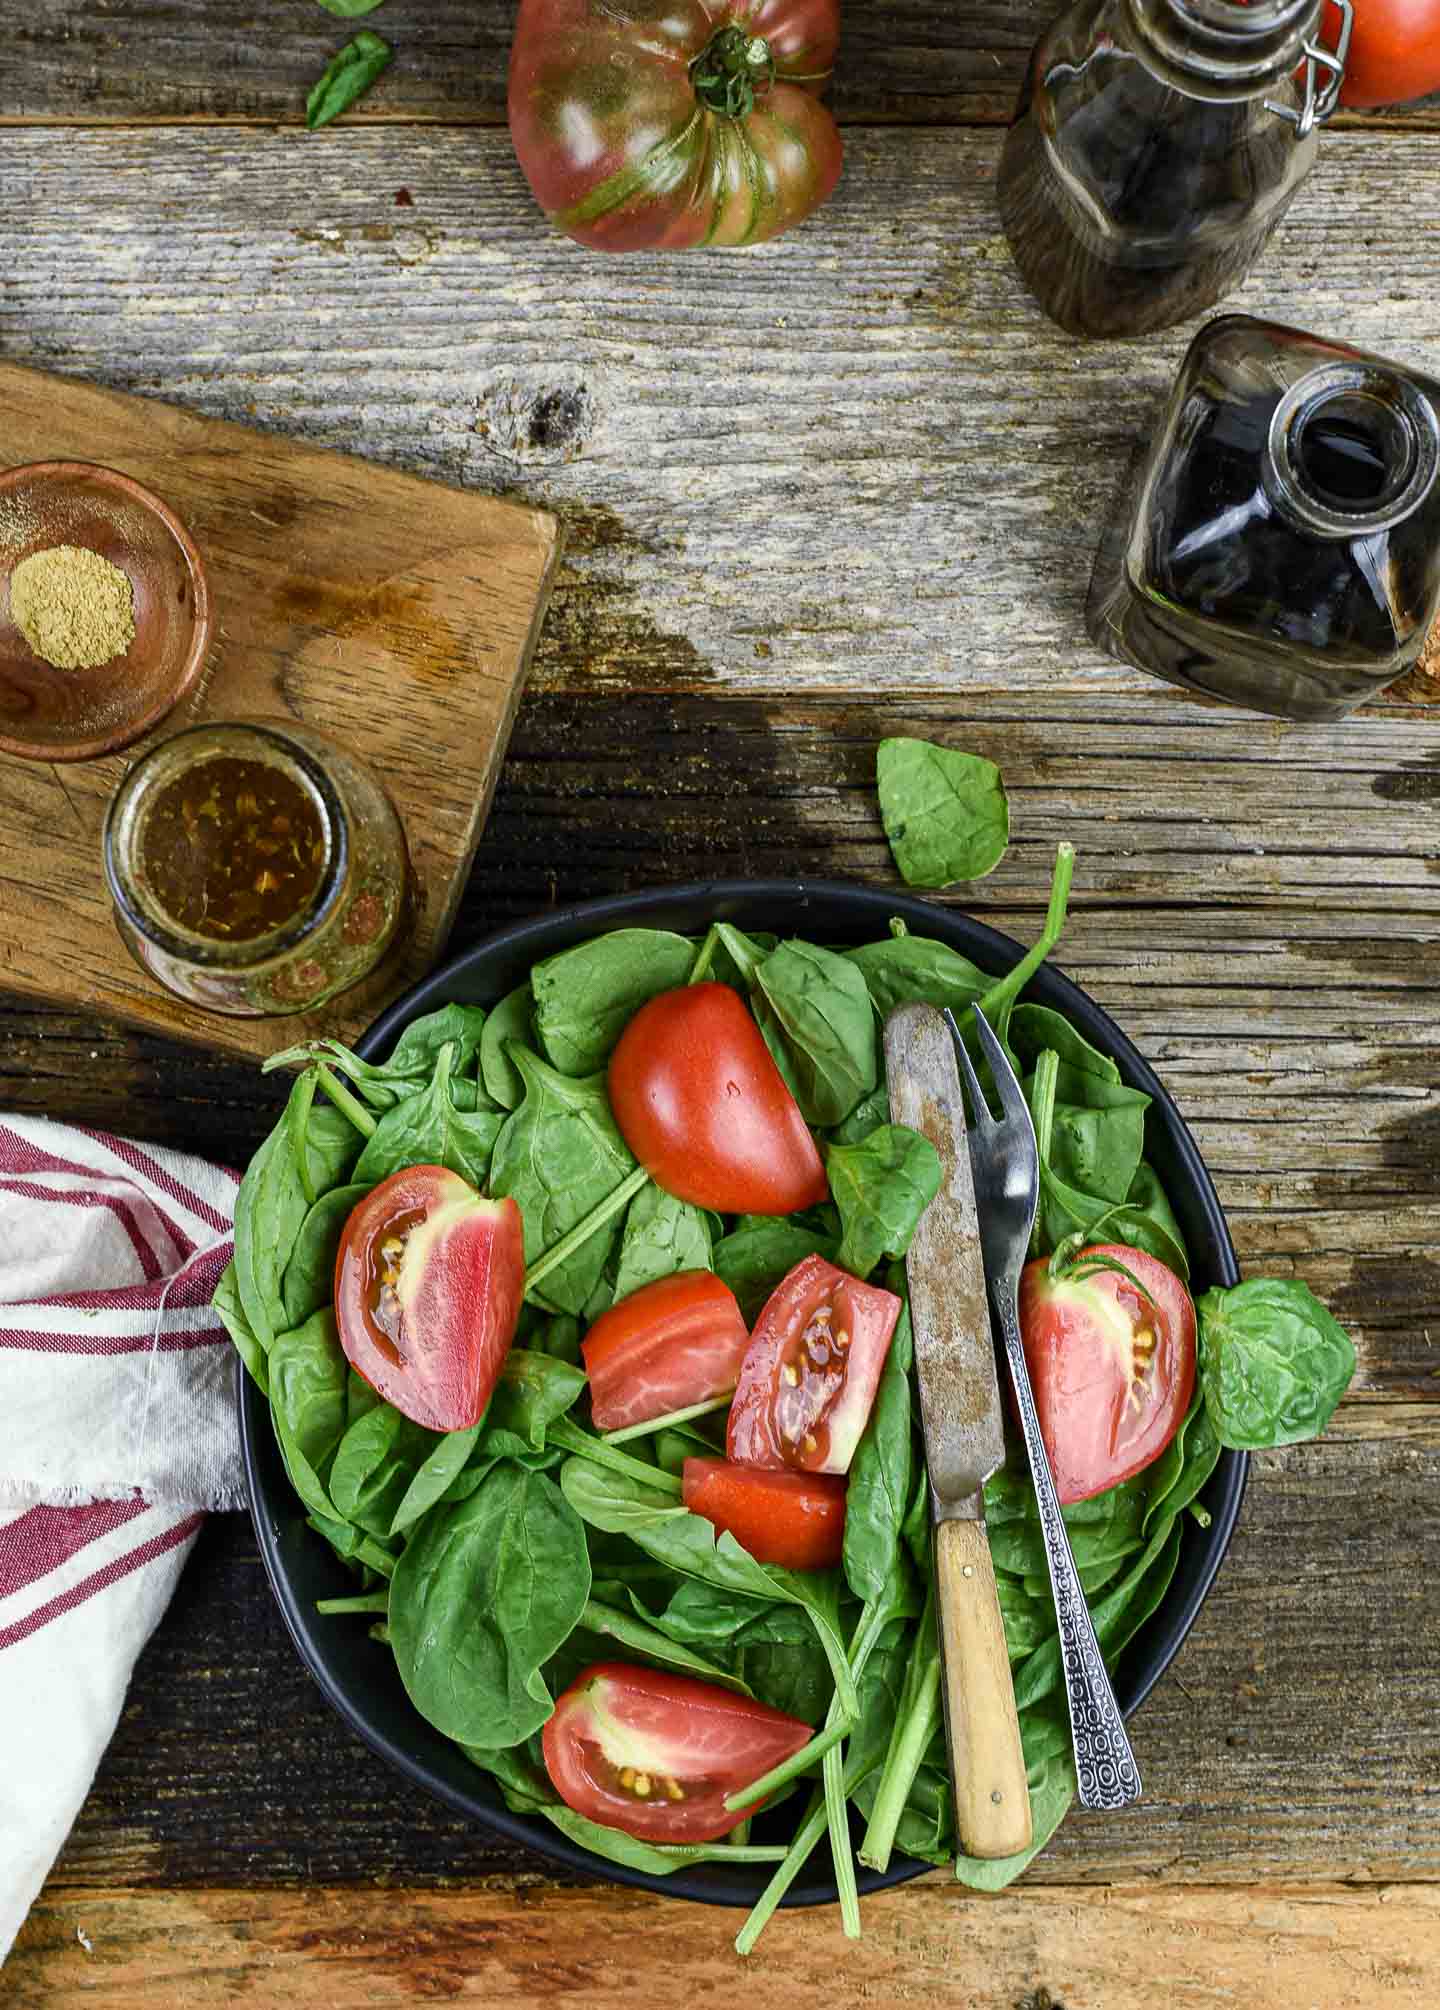 This balsamic Oil free Salad Dressing is so easy to make and ready in less than 2 minutes! Great on salads and pasta.